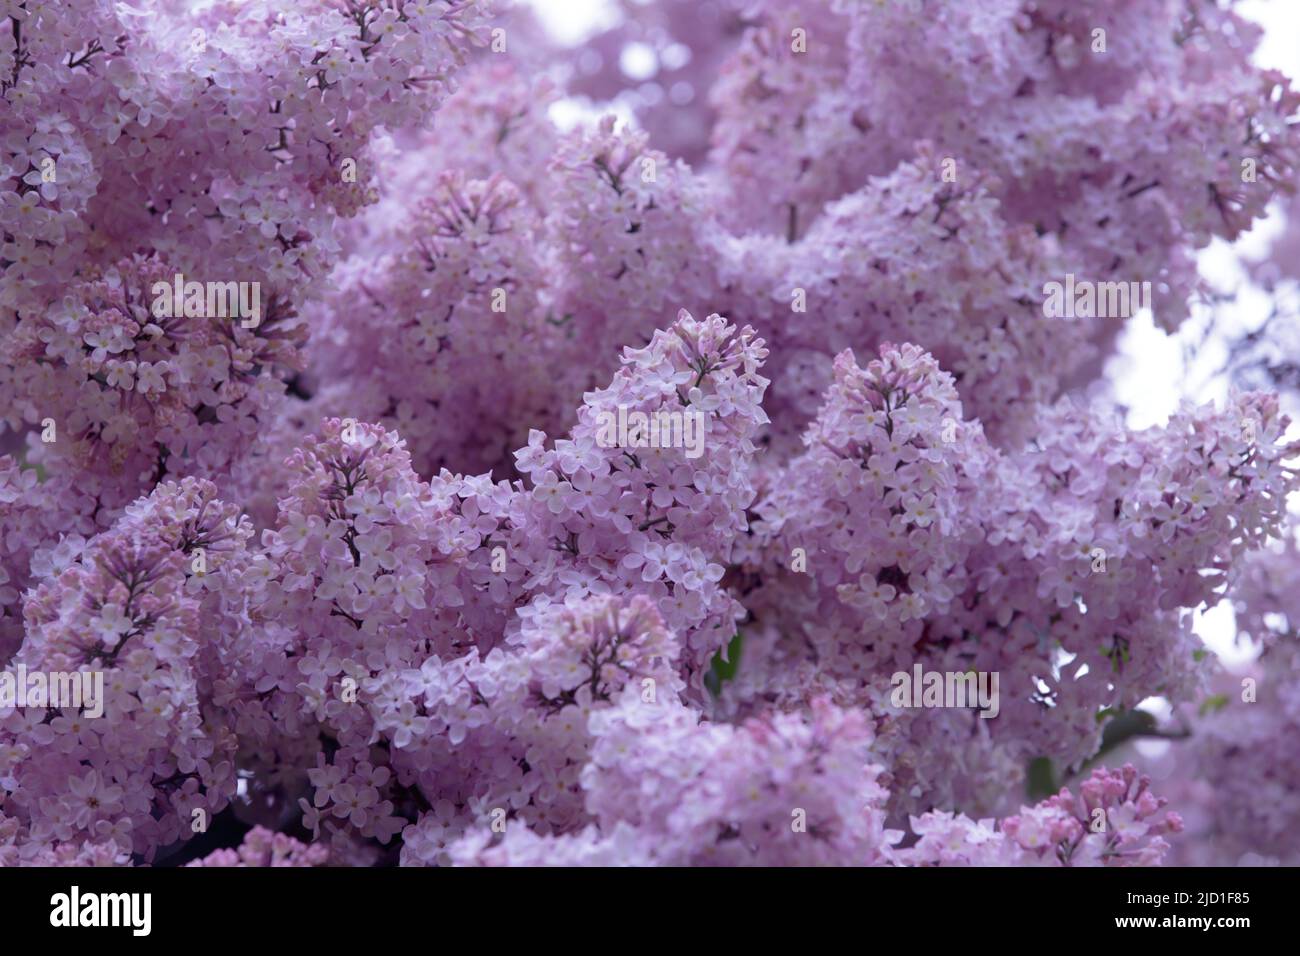 lilac flowers. purple and pink clusters of blooming lilac on the branches of bushes. blooming lilac garden Stock Photo